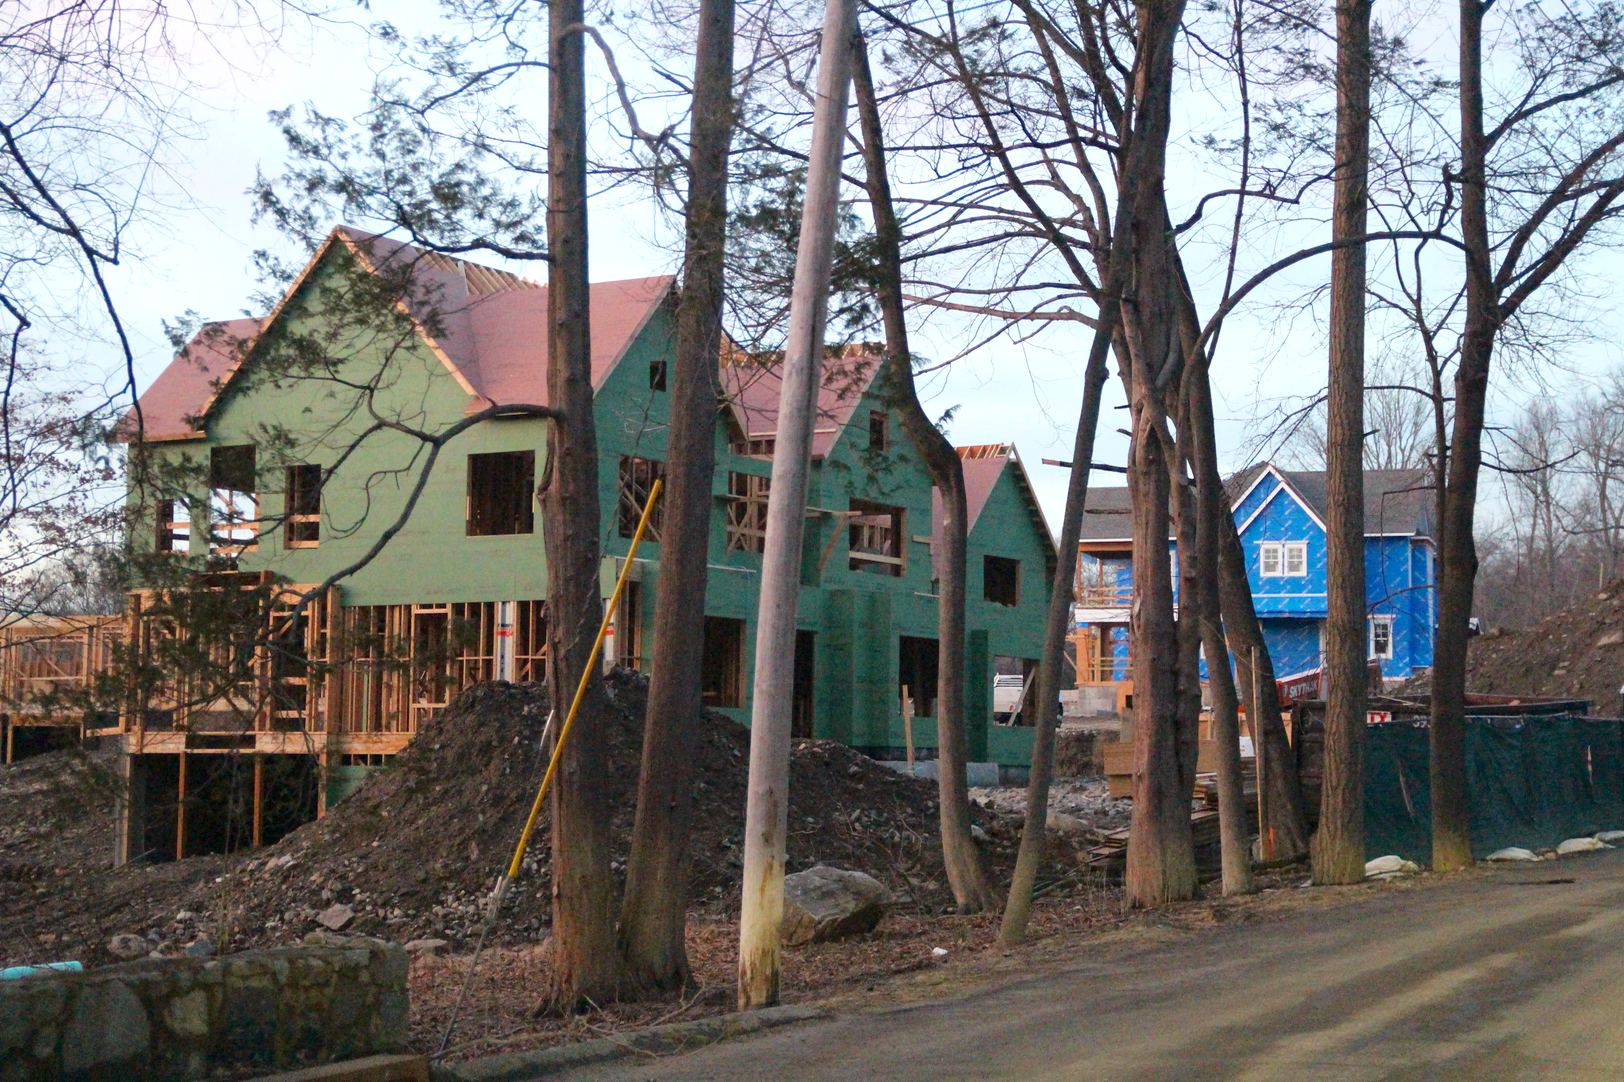 Houses under construction at 269 Palmer Hill Road. Feb 20, 2018